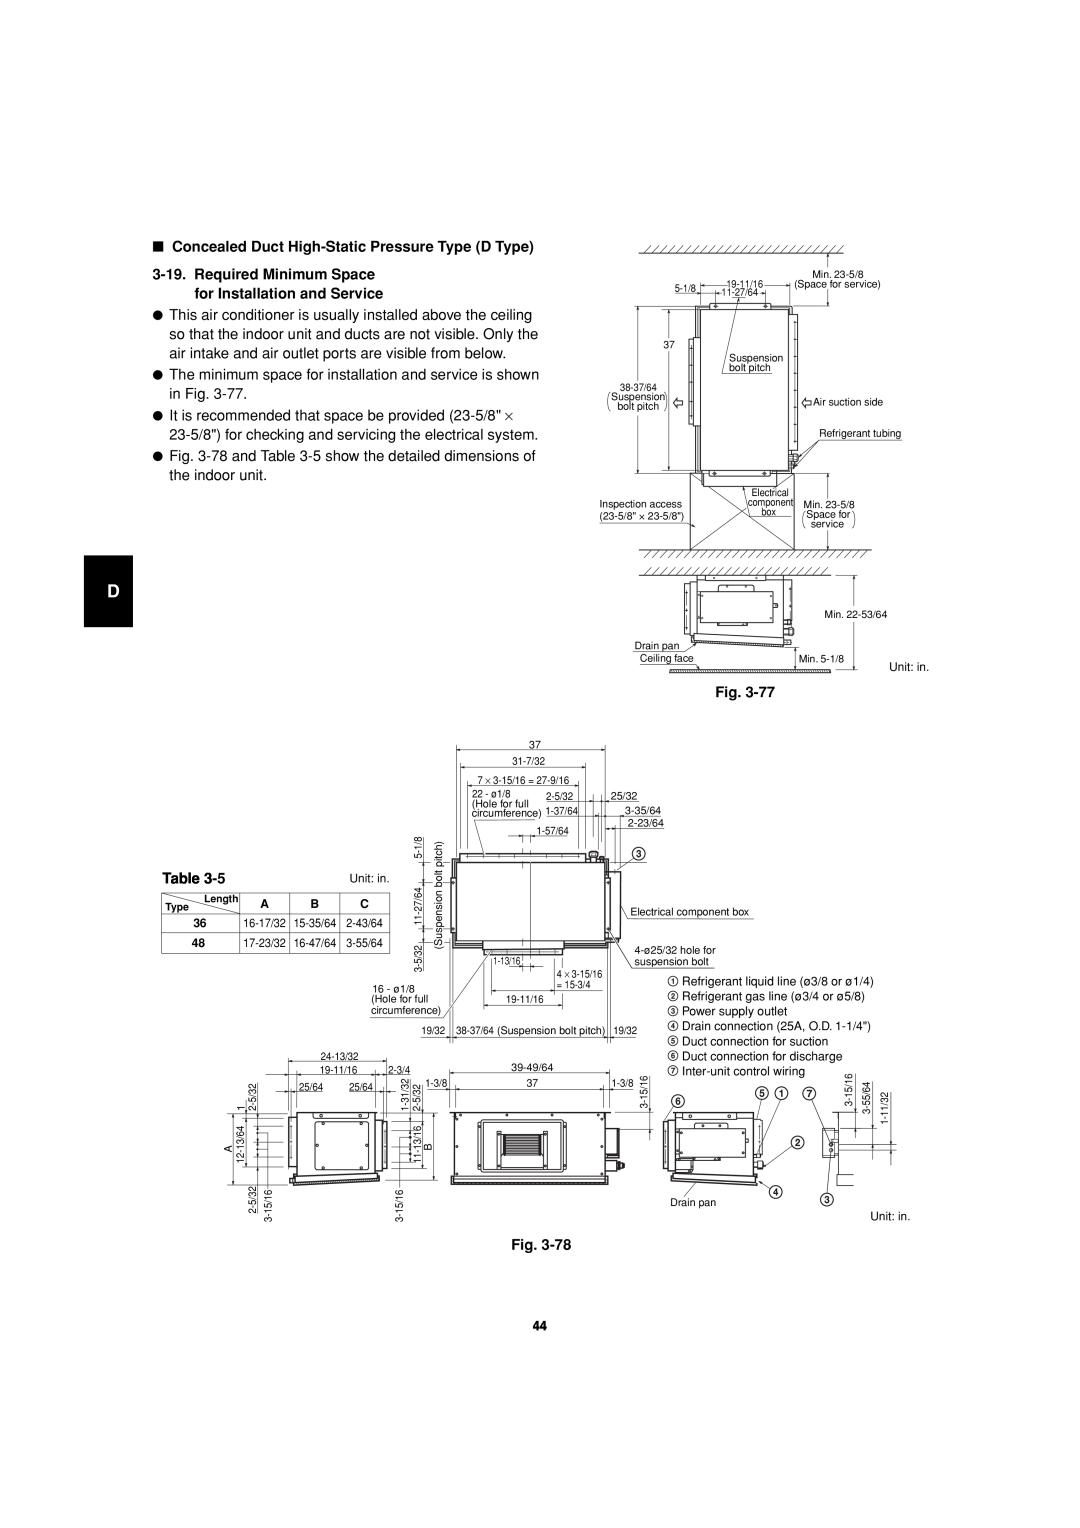 Sanyo 85464359981002 installation instructions Concealed Duct High-StaticPressure Type D Type, Fig, Table 